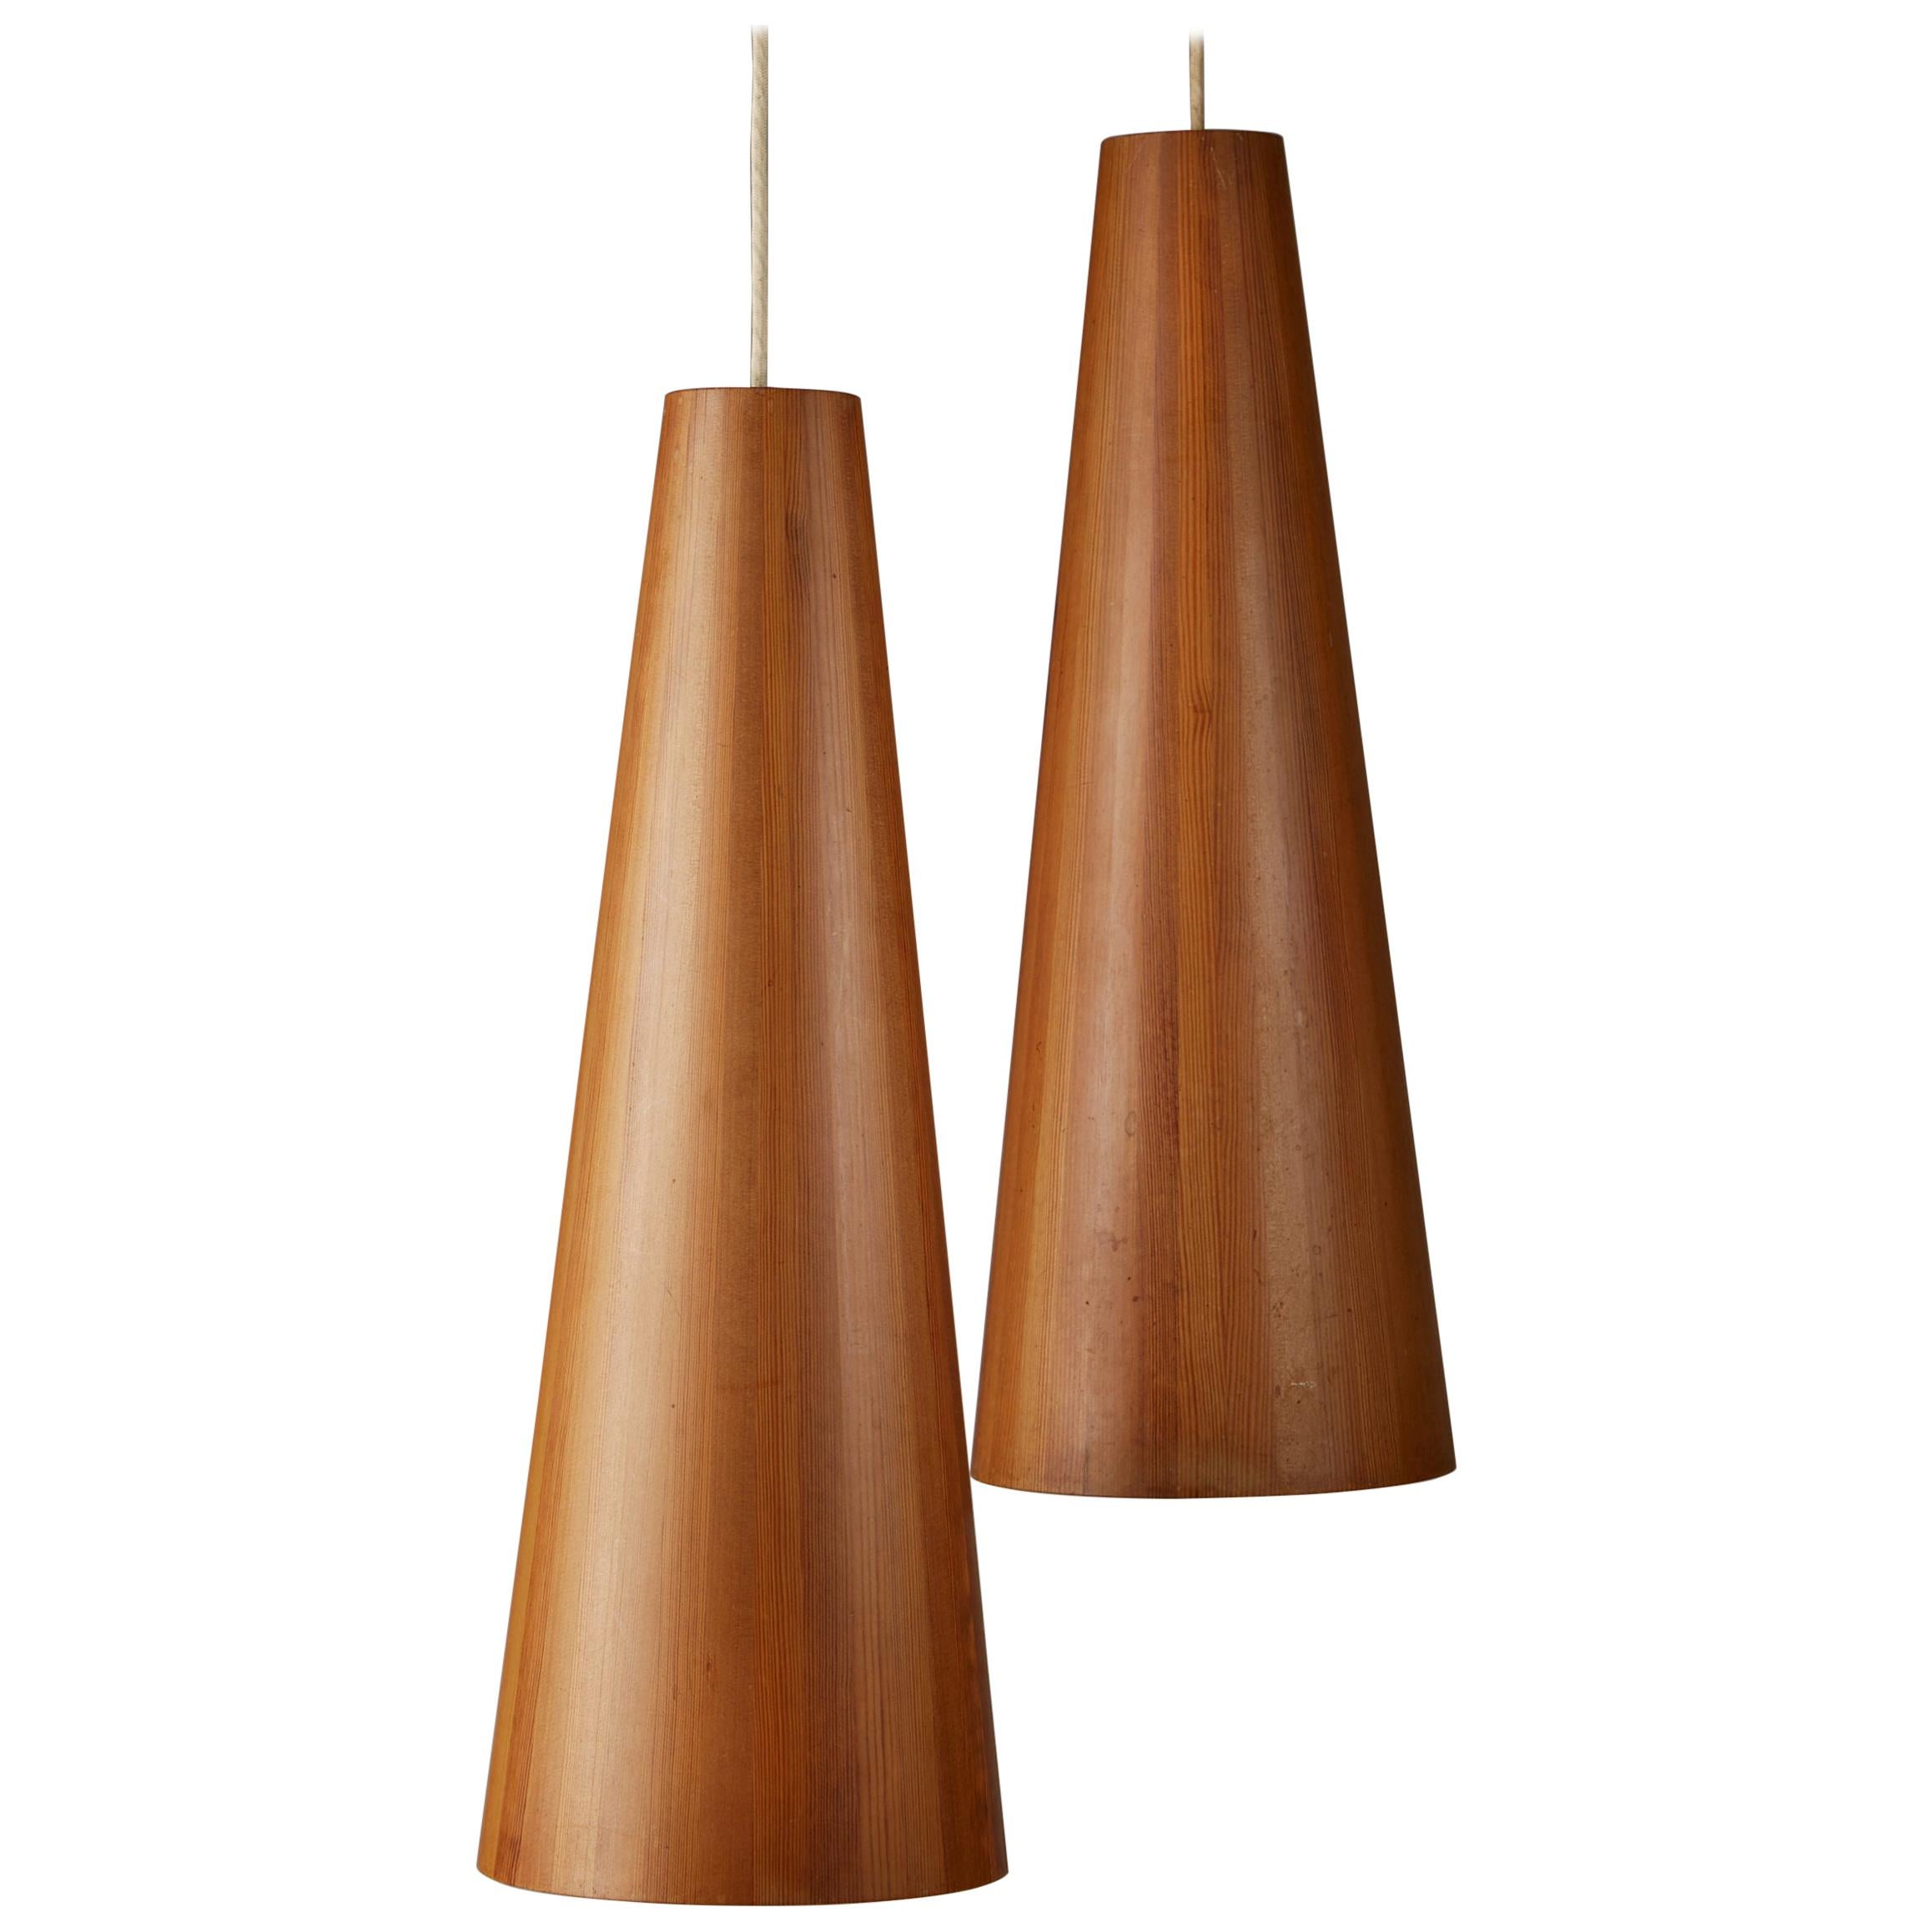 Pair of Ceiling Lamps Designed by Jörgen Wolff for Christian A. Wolff, Denmark